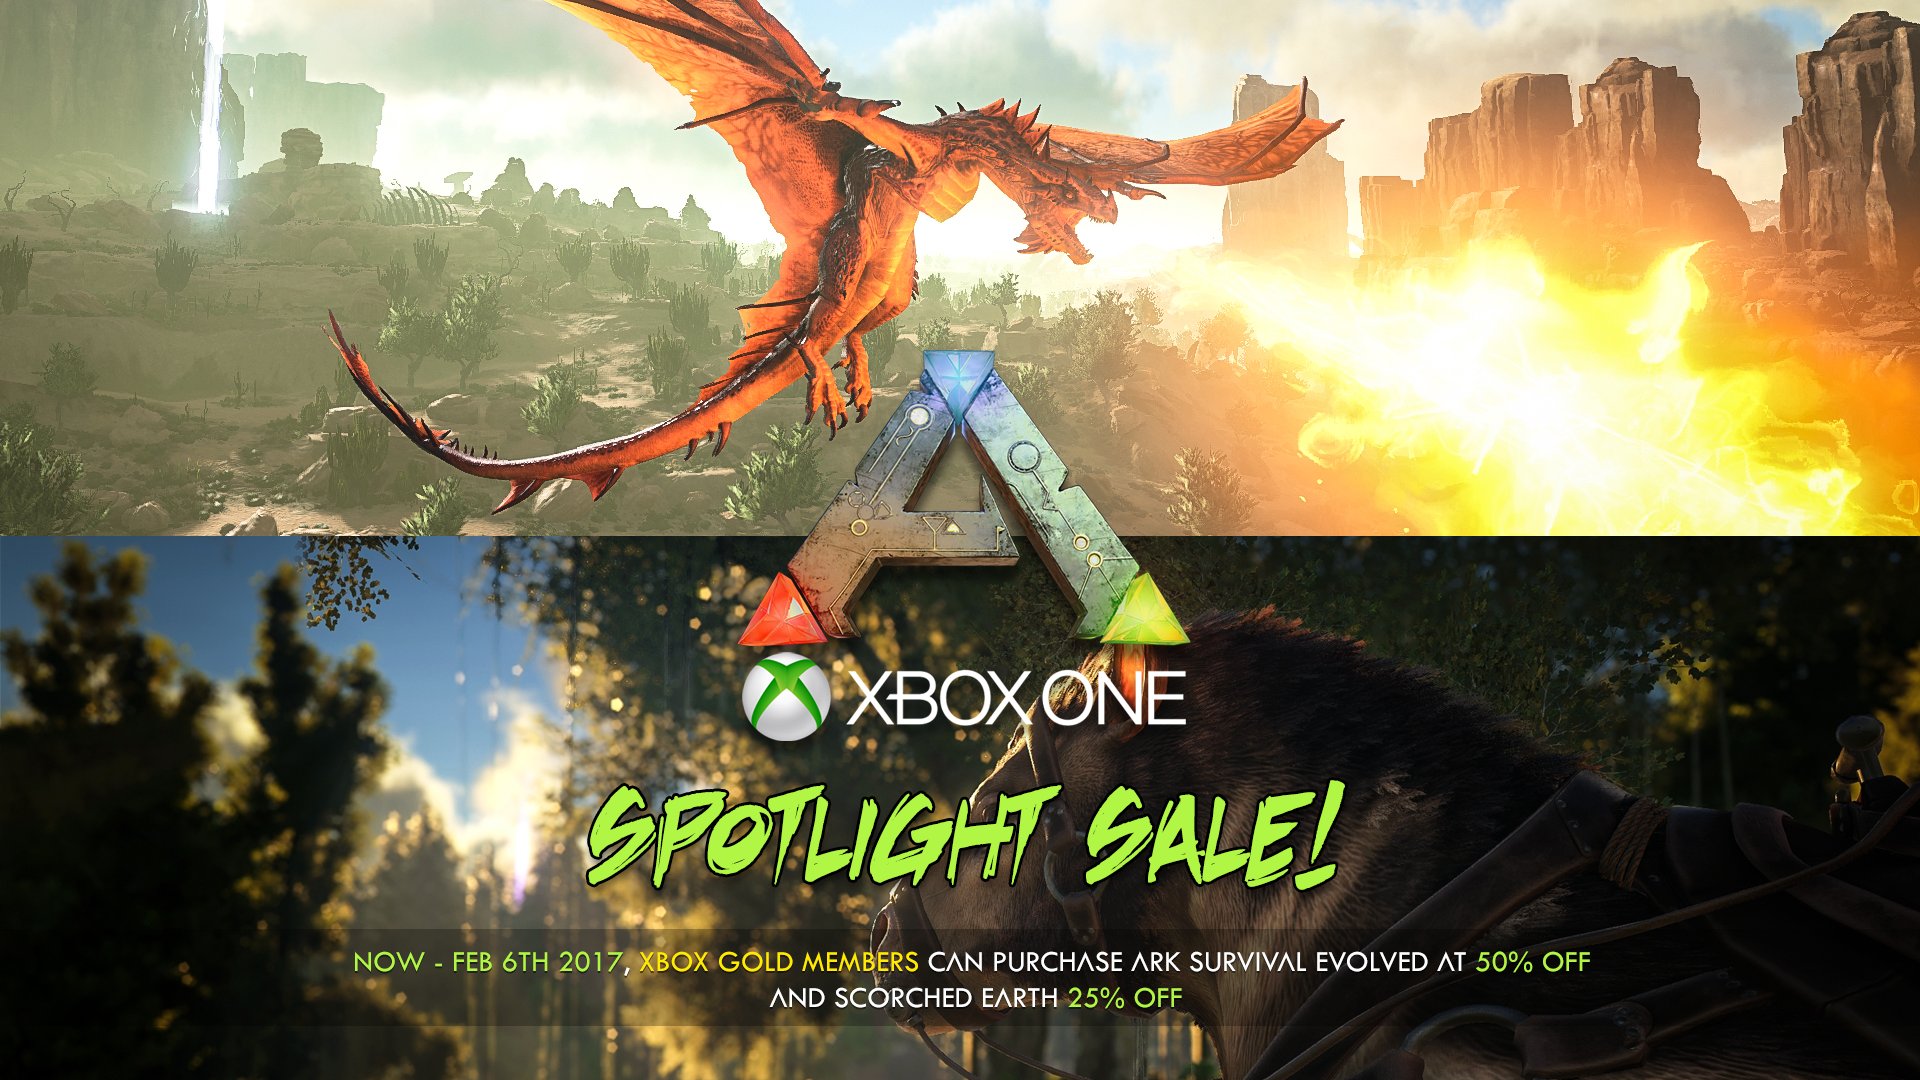 Ark survival ascended scorched earth. Ark Xbox. Ark Xbox one sale. Scorched Earth игра. Ark Survival Evolved Scorched Earth.